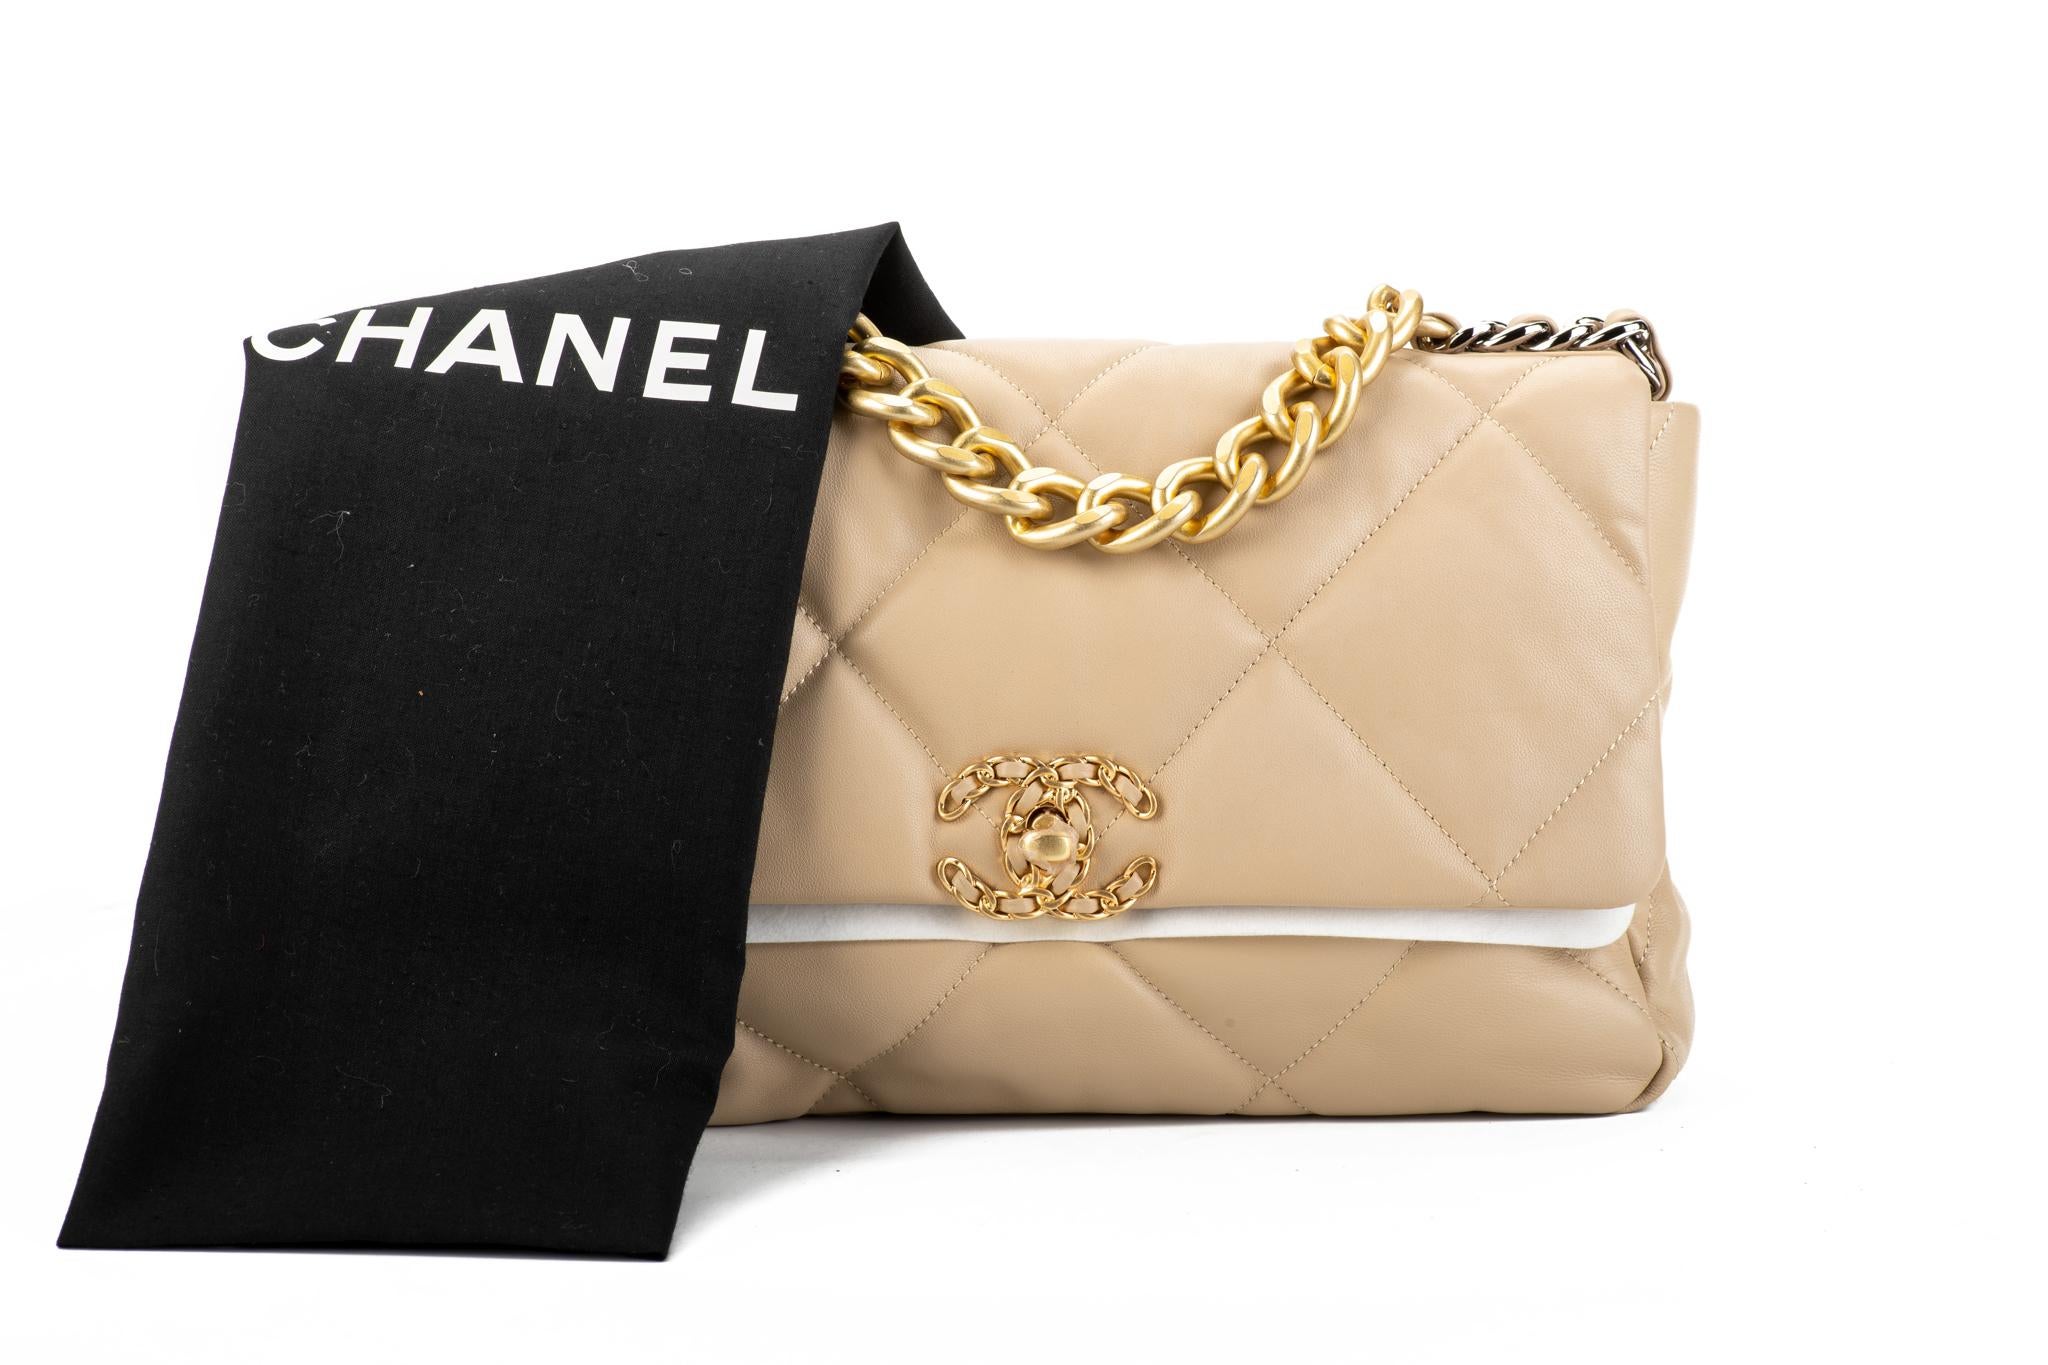 Chanel sold out worldwide 